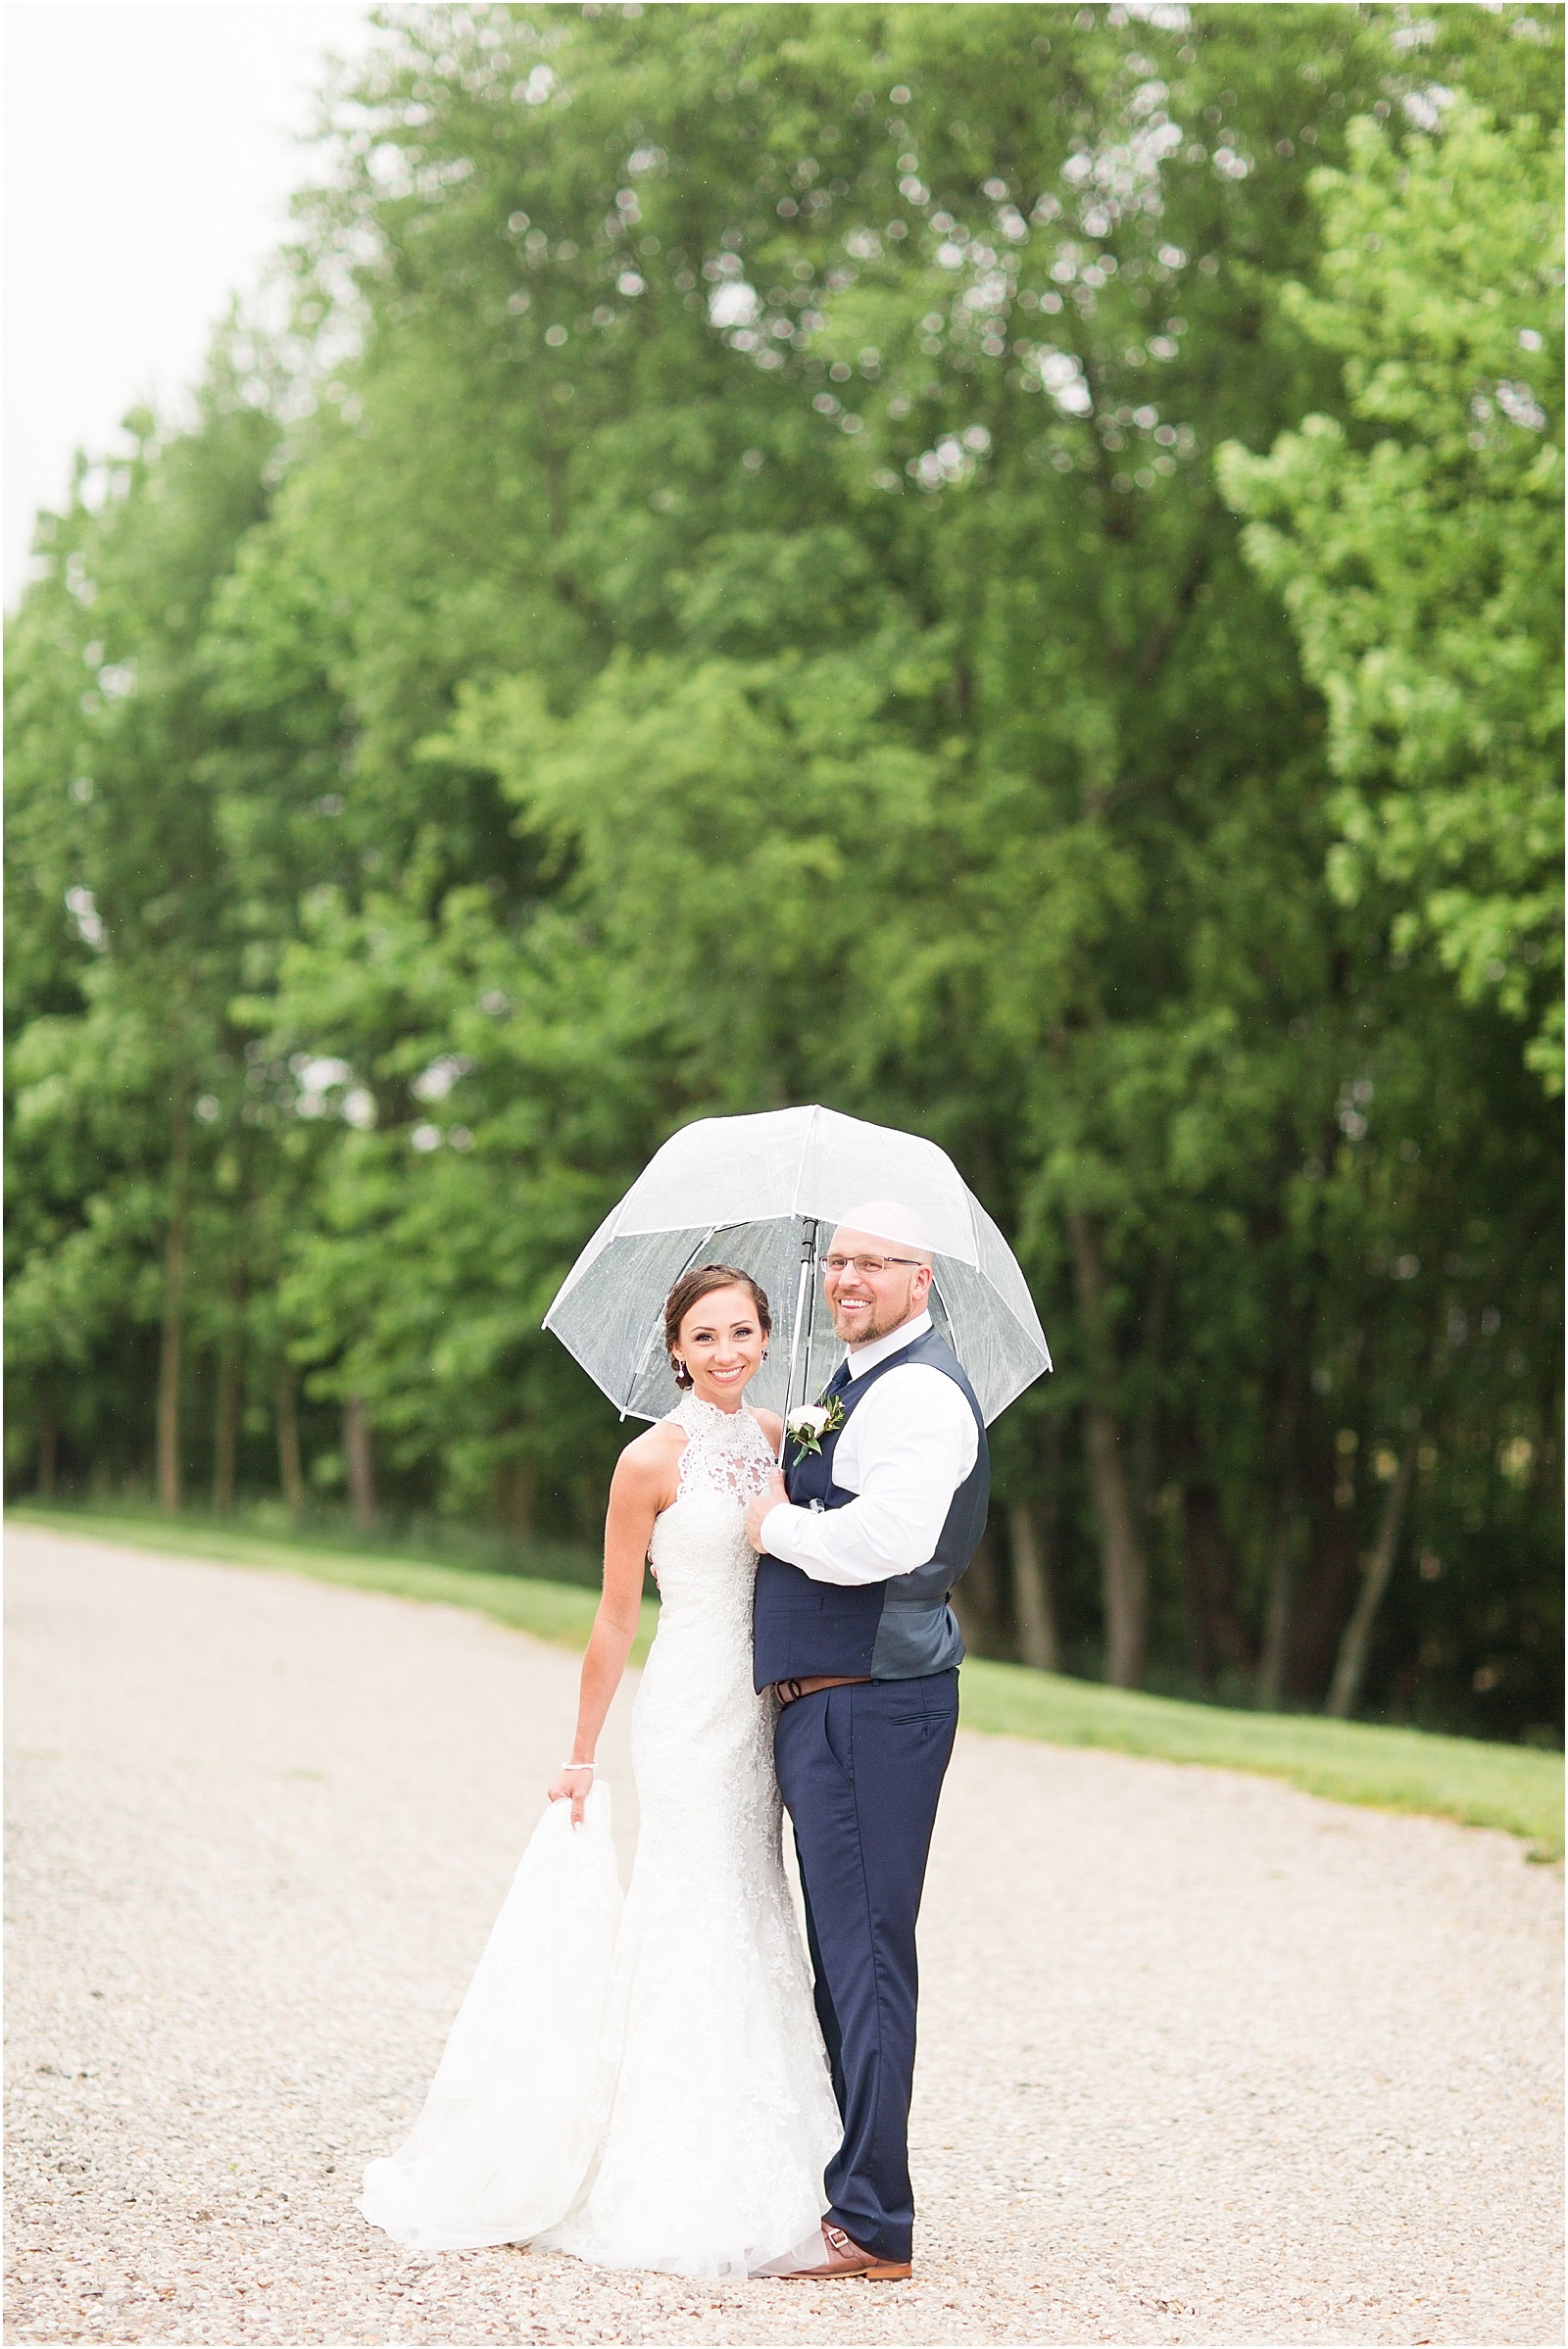 The Corner House Bed and Breakfast Wedding | Meagan and Michael089.jpg